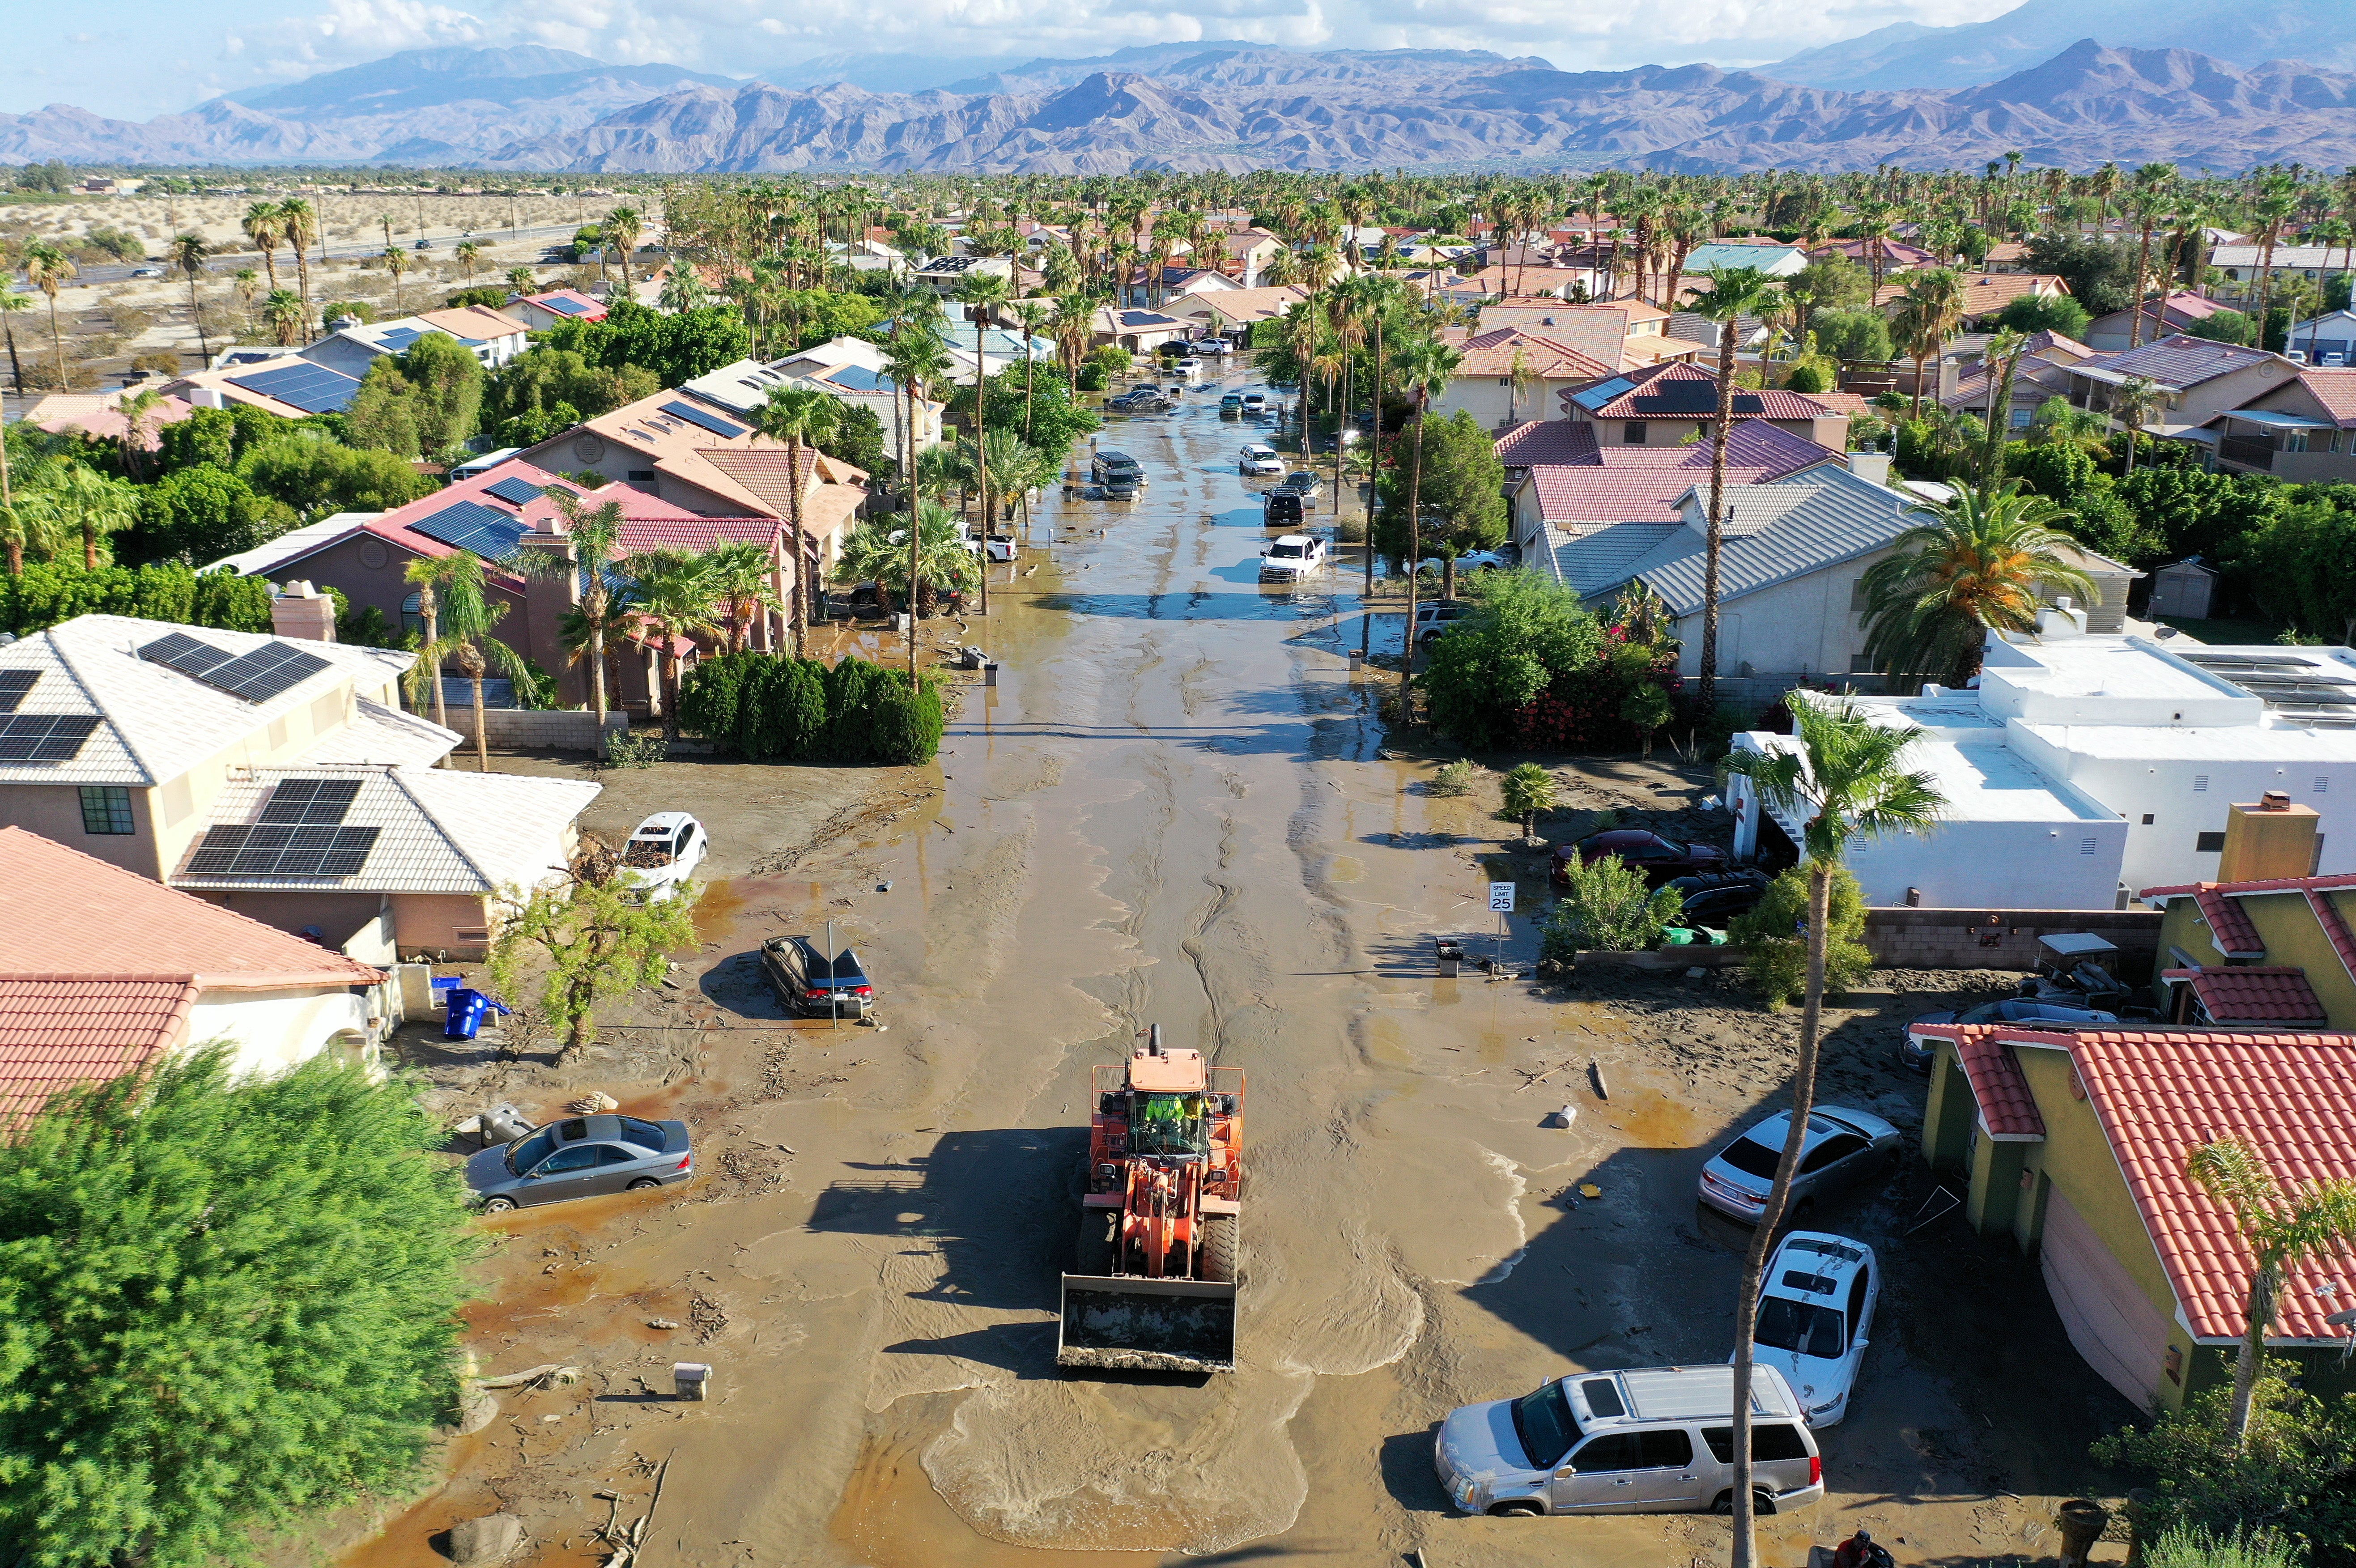 An aerial view of a maintenance vehicle clearing mud near stranded vehicles along a flooded street after Tropical Storm Hilary floodwaters inundated an area of Cathedral City, California